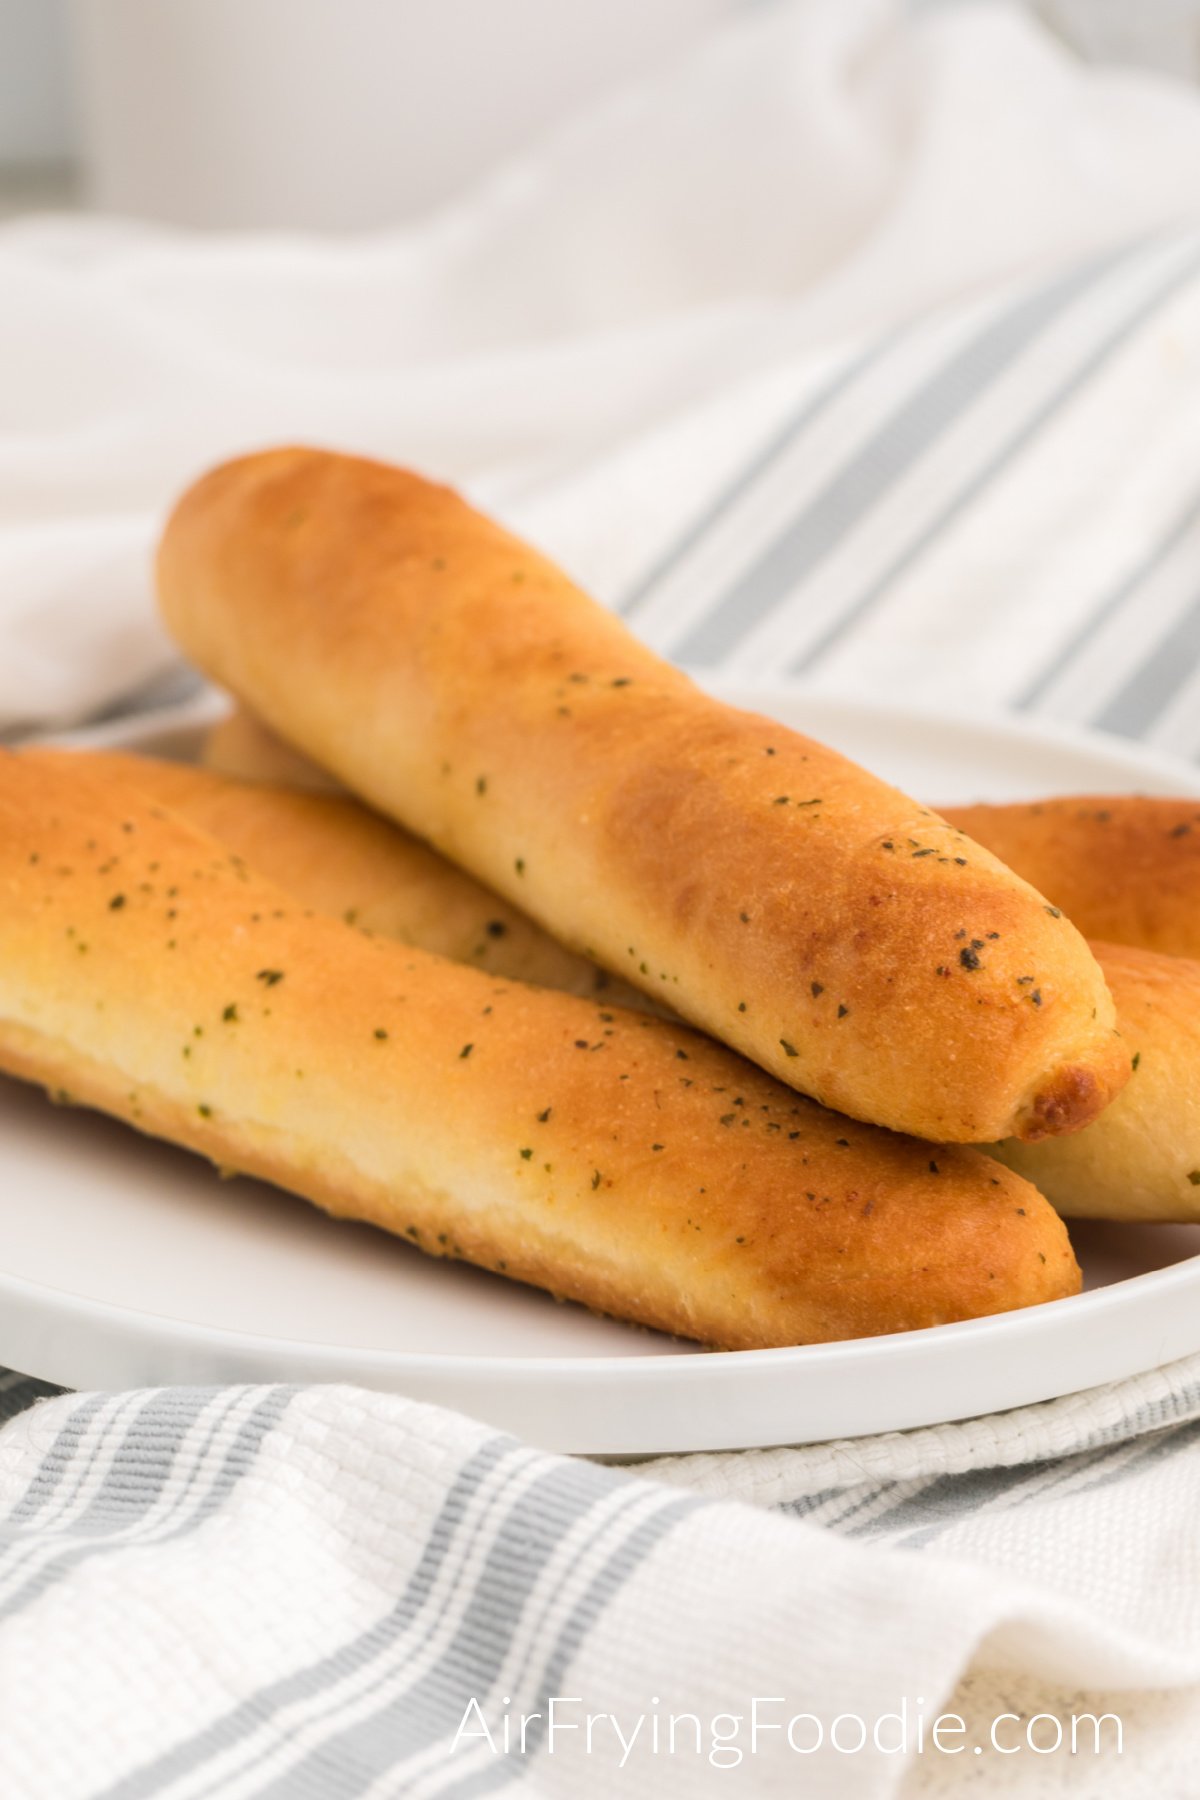 Fully cooked breadsticks stacked on a plate, ready to serve.